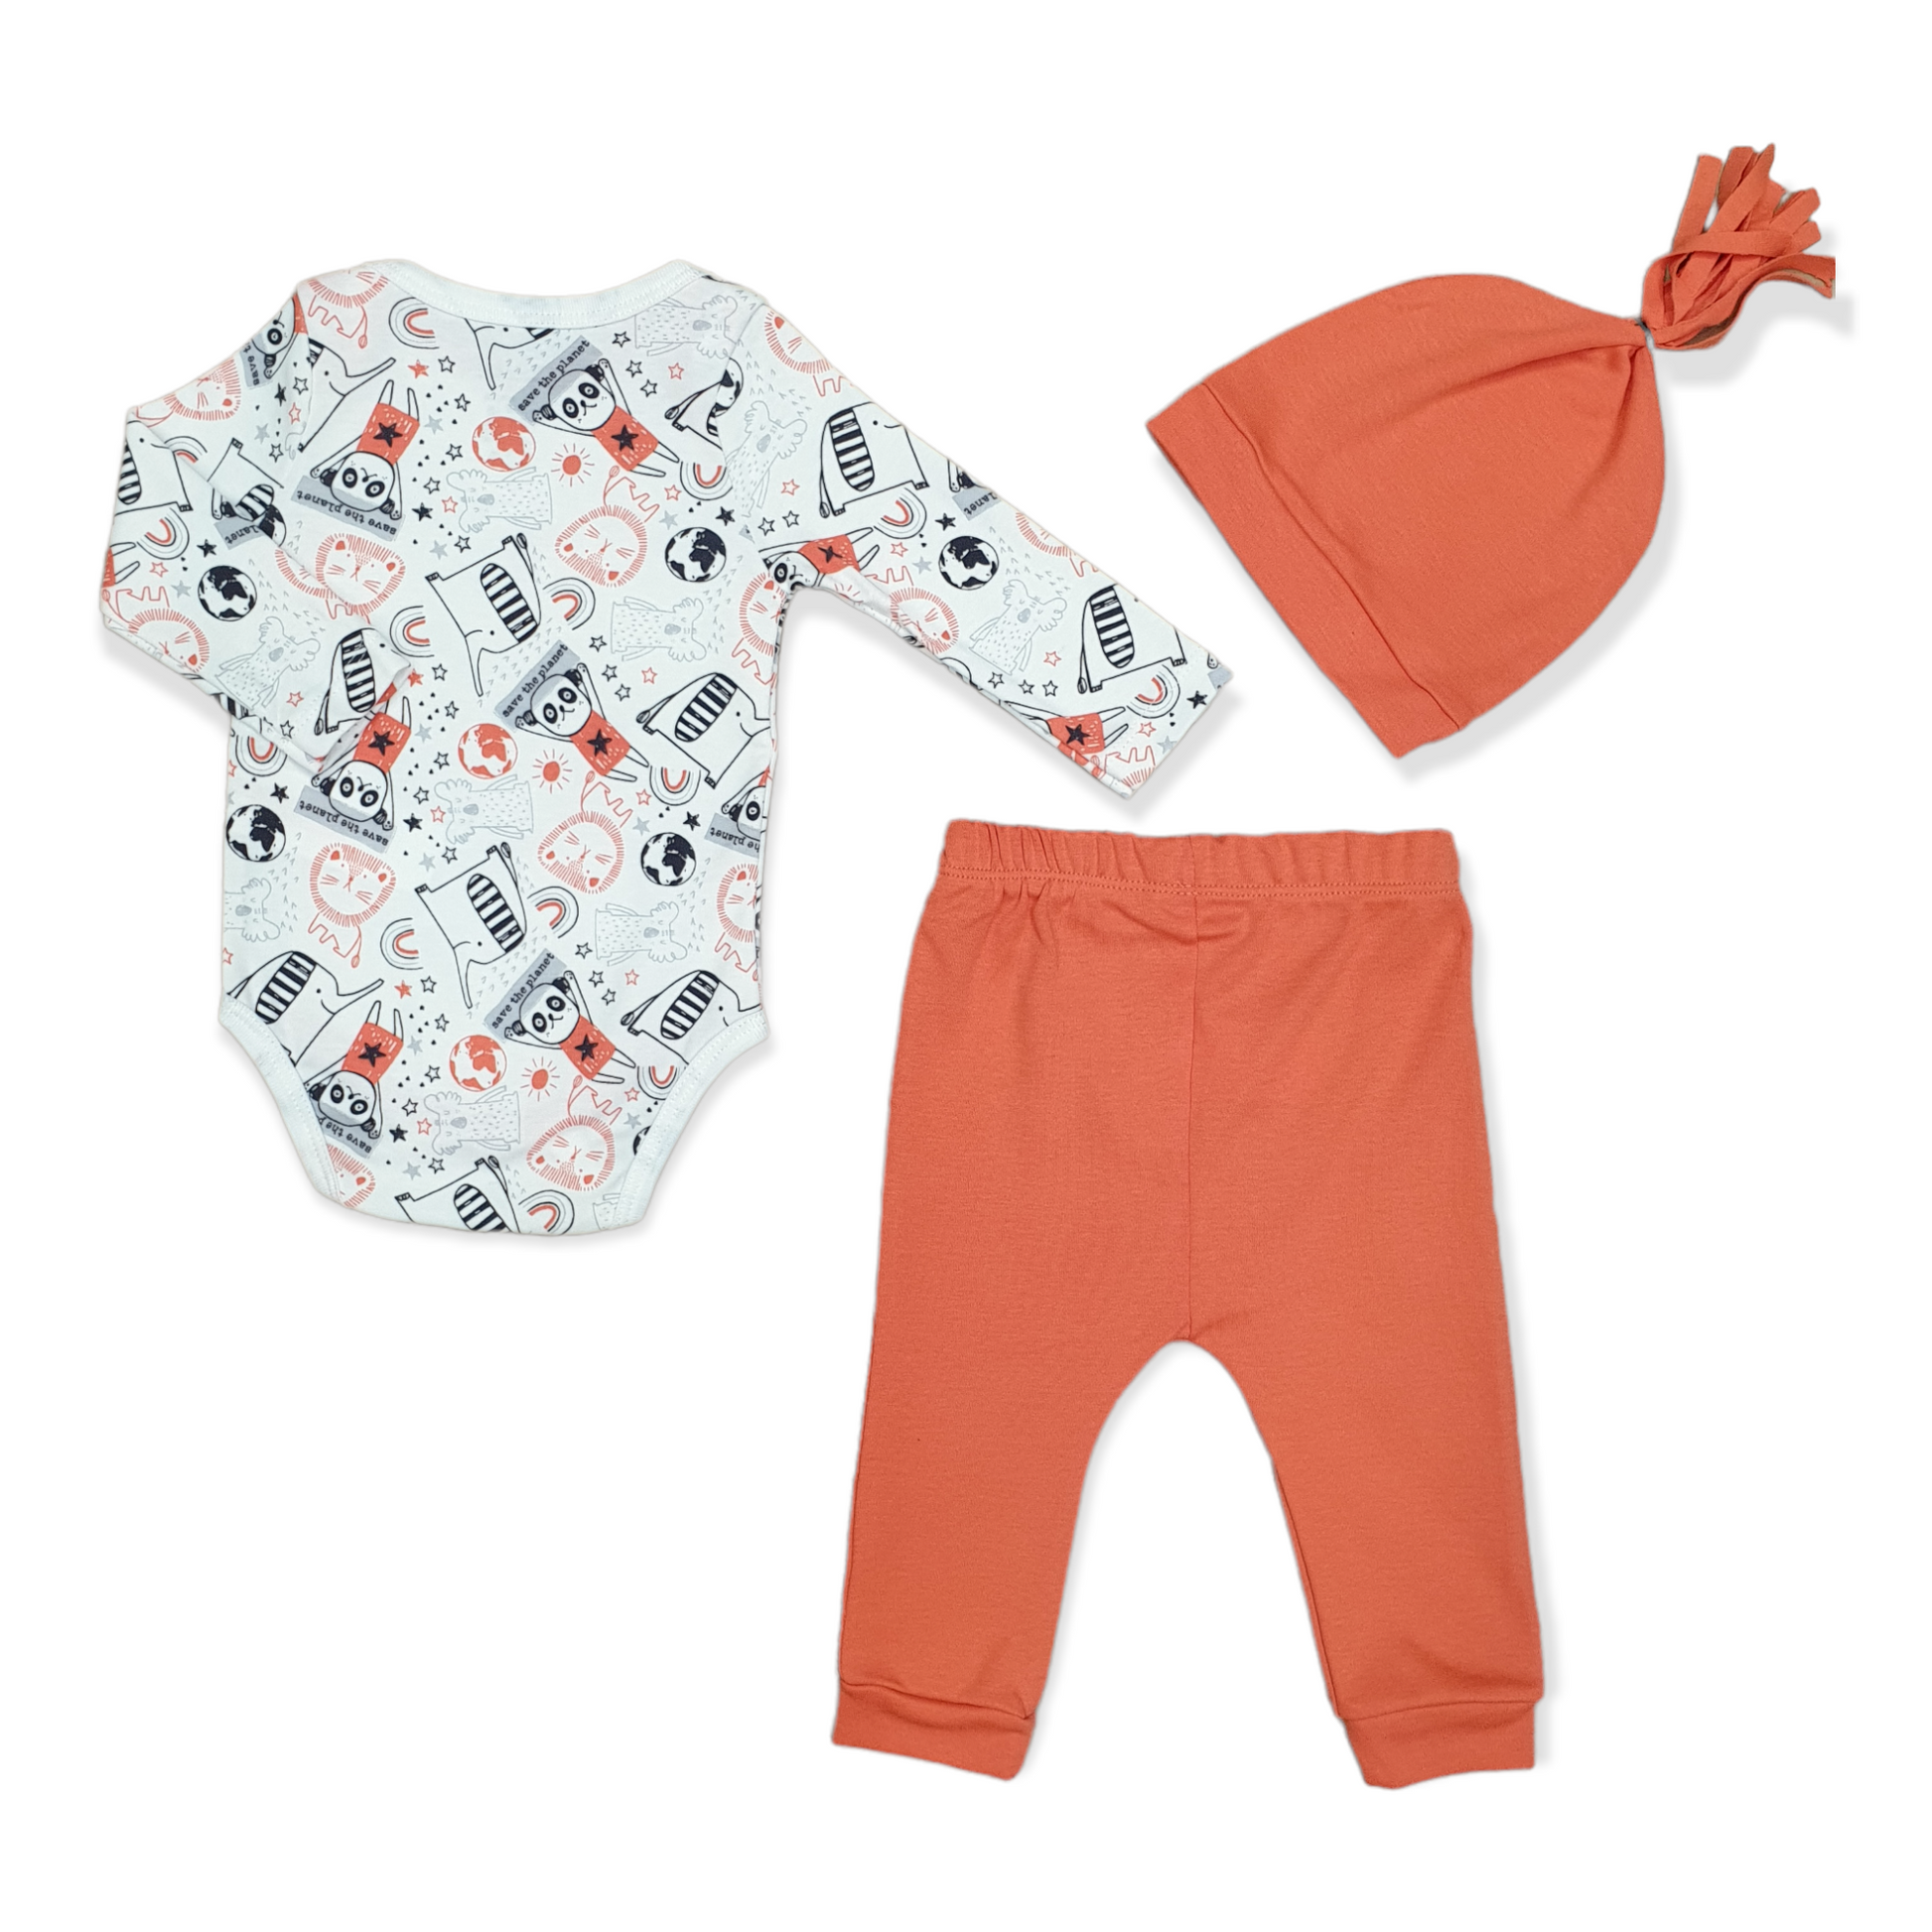 Save The Planet Baby Boy Body with Pants and Cap-Animals, Body, Bodysuit, Boy, Cap, catboy, catset3pcs, Creeper, Earth, Footless, Hat, Long Sleeve, Onesie, Orange, Pants, Planet, Save, White-Miniworld-[Too Twee]-[Tootwee]-[baby]-[newborn]-[clothes]-[essentials]-[toys]-[Lebanon]